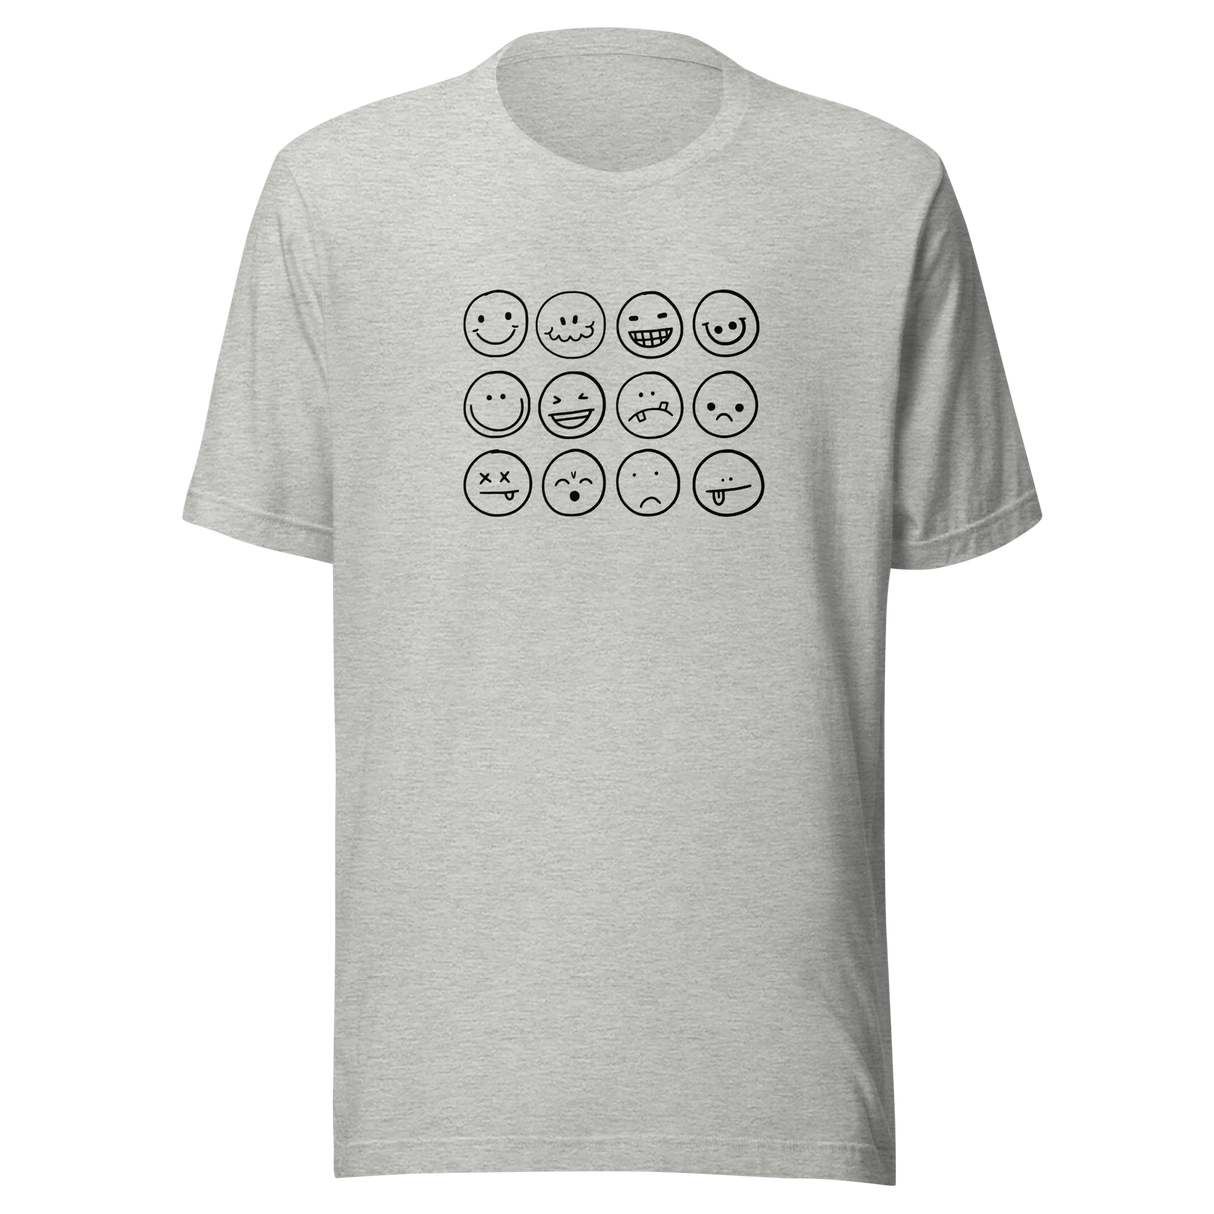 black-and-white-outlines-of-hand-drawn-smiley-faces-smiley-tee-smile-t-shirt-smiley-face-tee-funny-t-shirt-emoticon-tee#color_athletic-heather